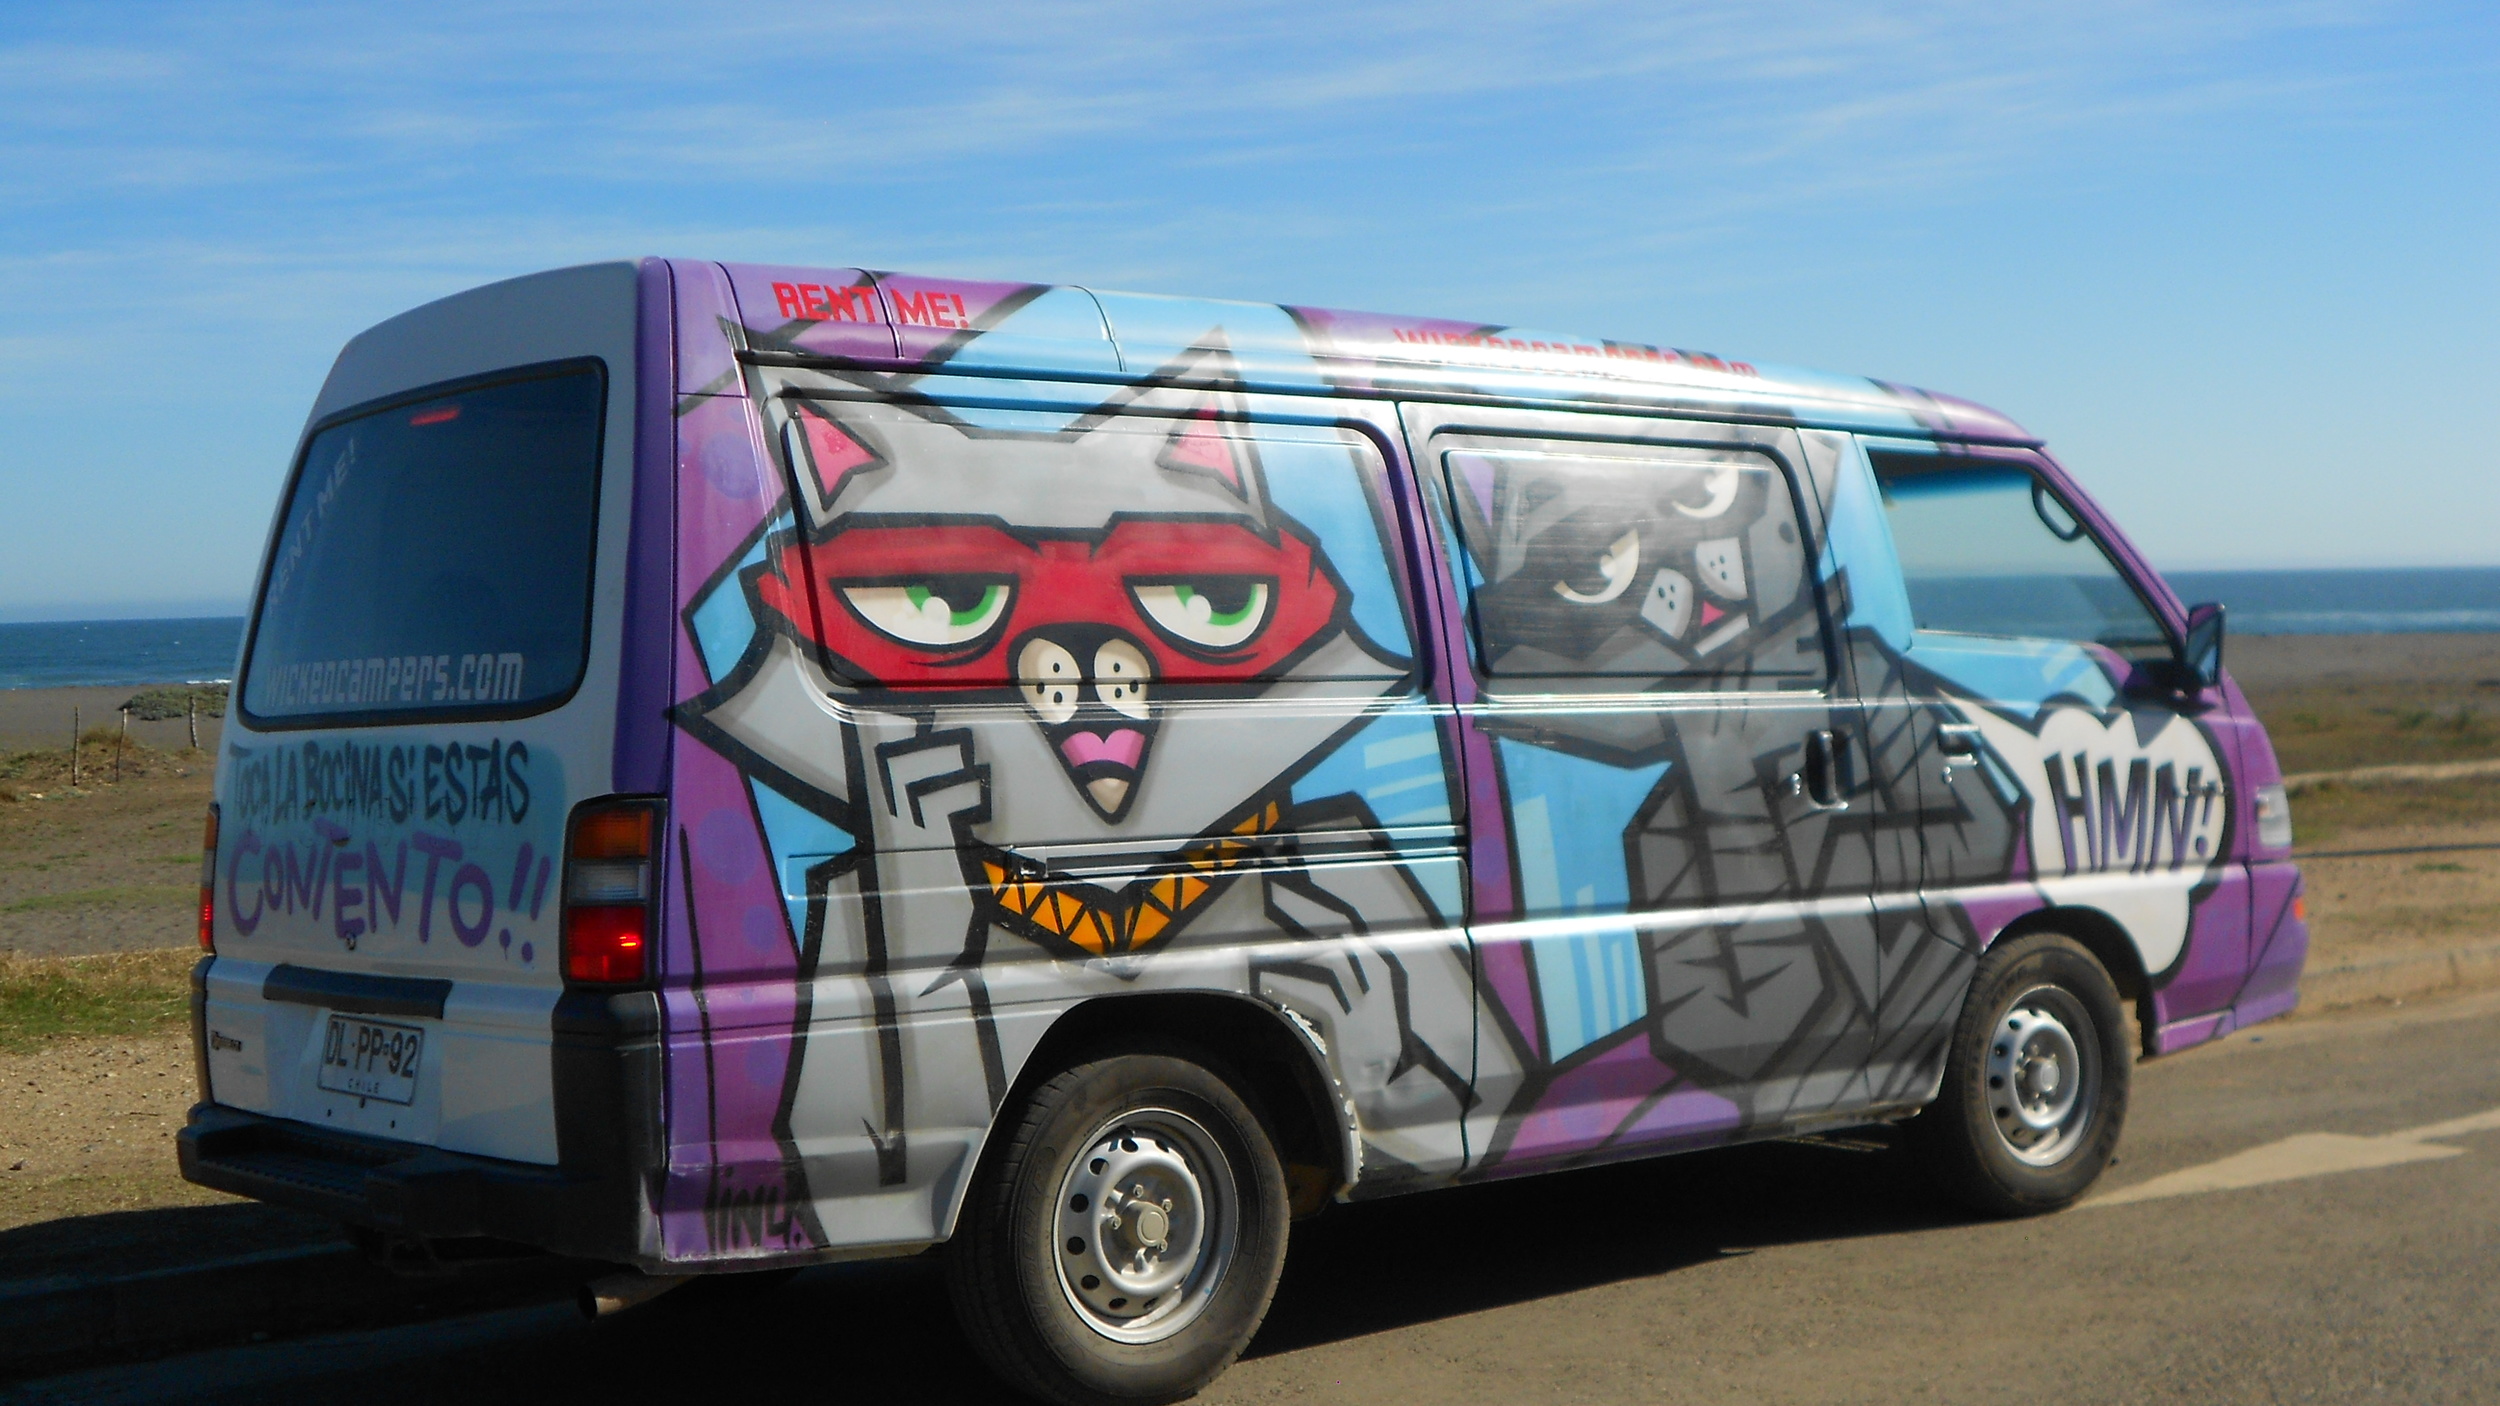   The campervan we rented in Chile- the kitty paint job was a nice surprise.  